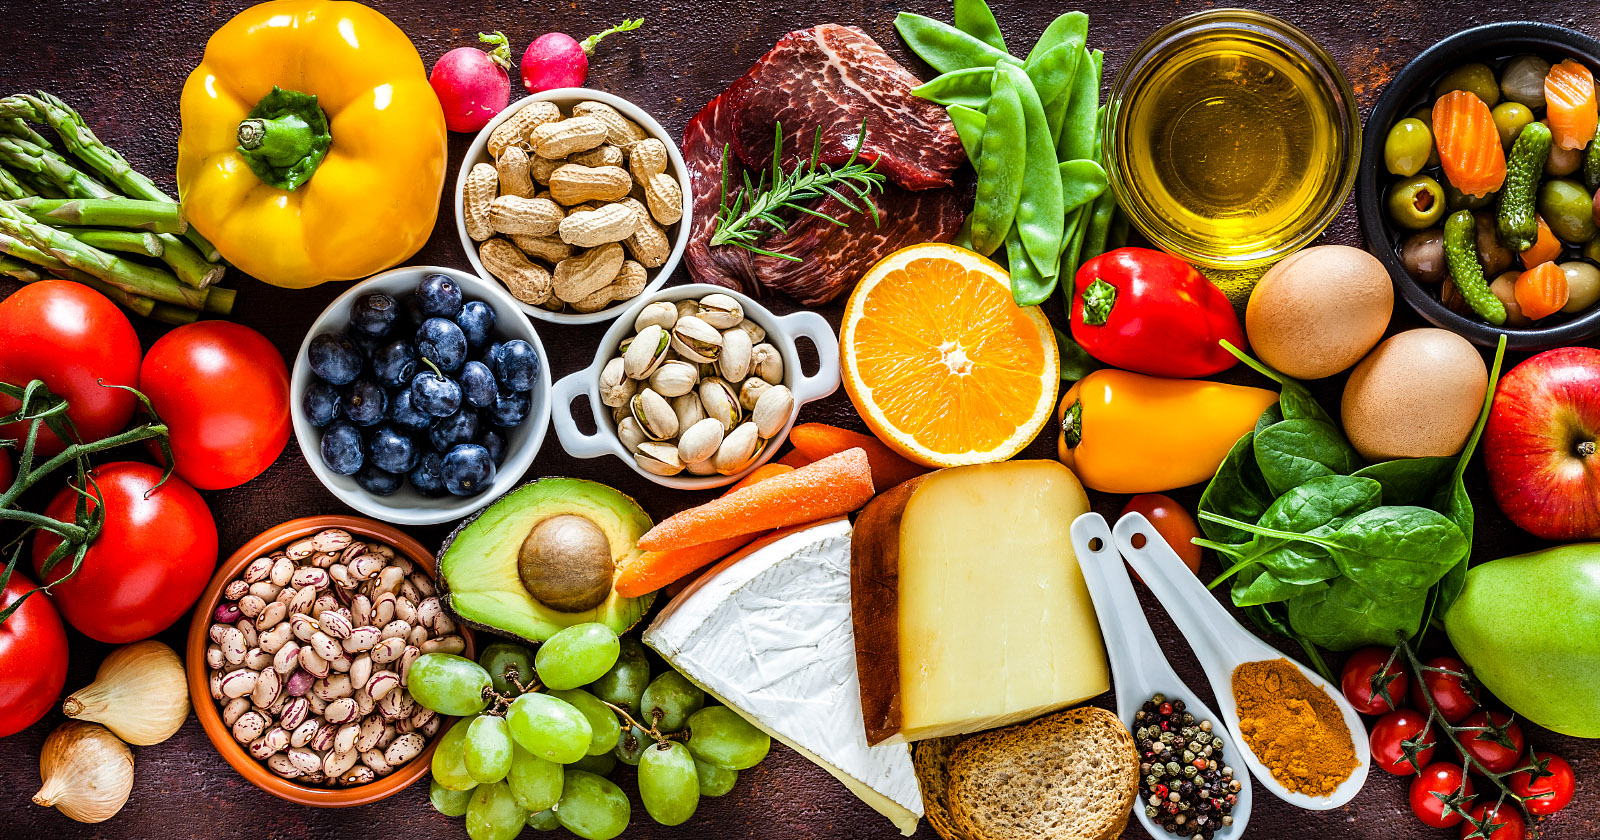 Mediterranean diet, a potential new way to reduce blood cholesterol and improve gut health